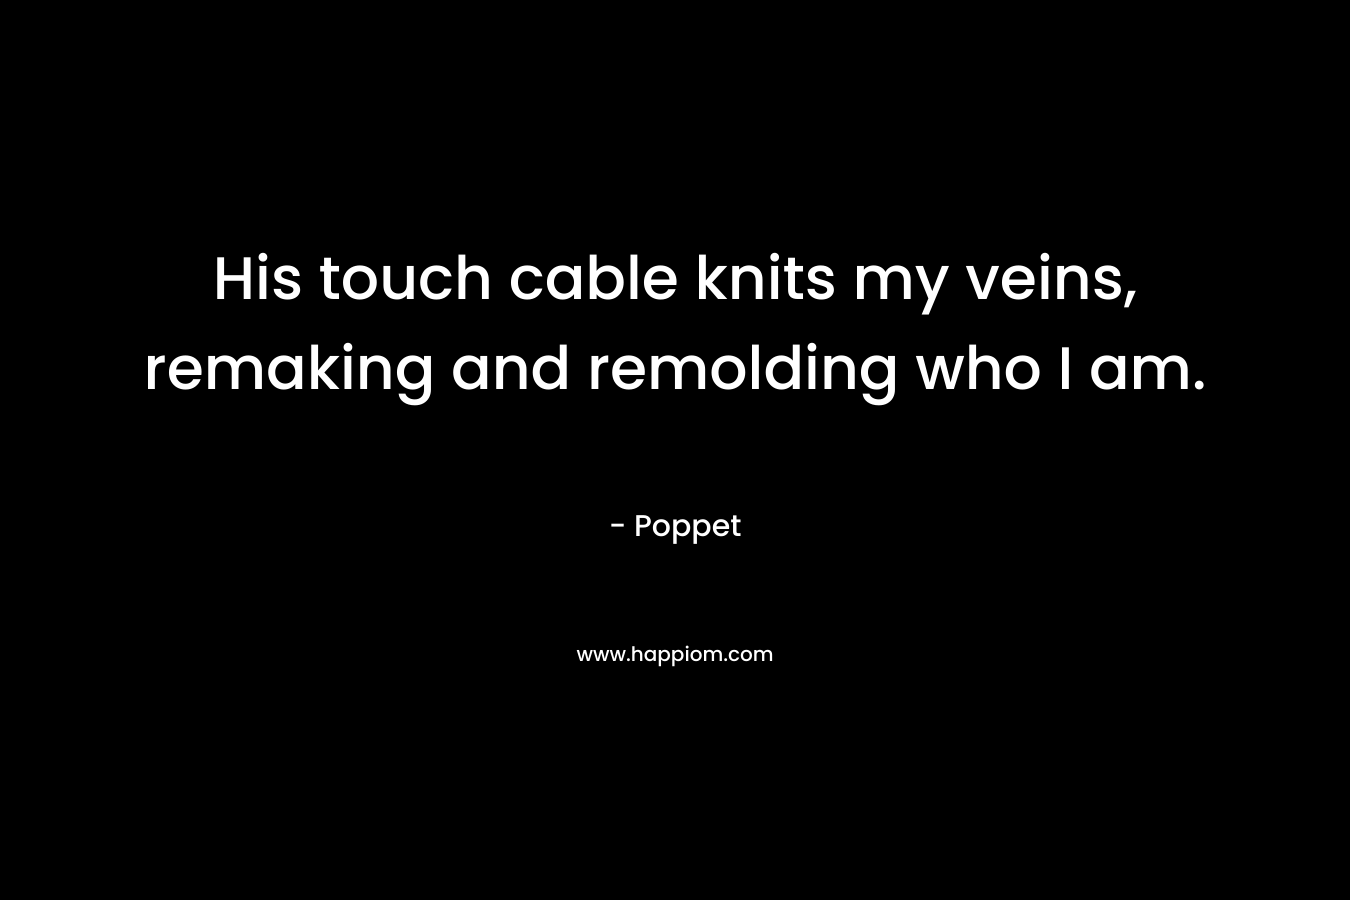 His touch cable knits my veins, remaking and remolding who I am.